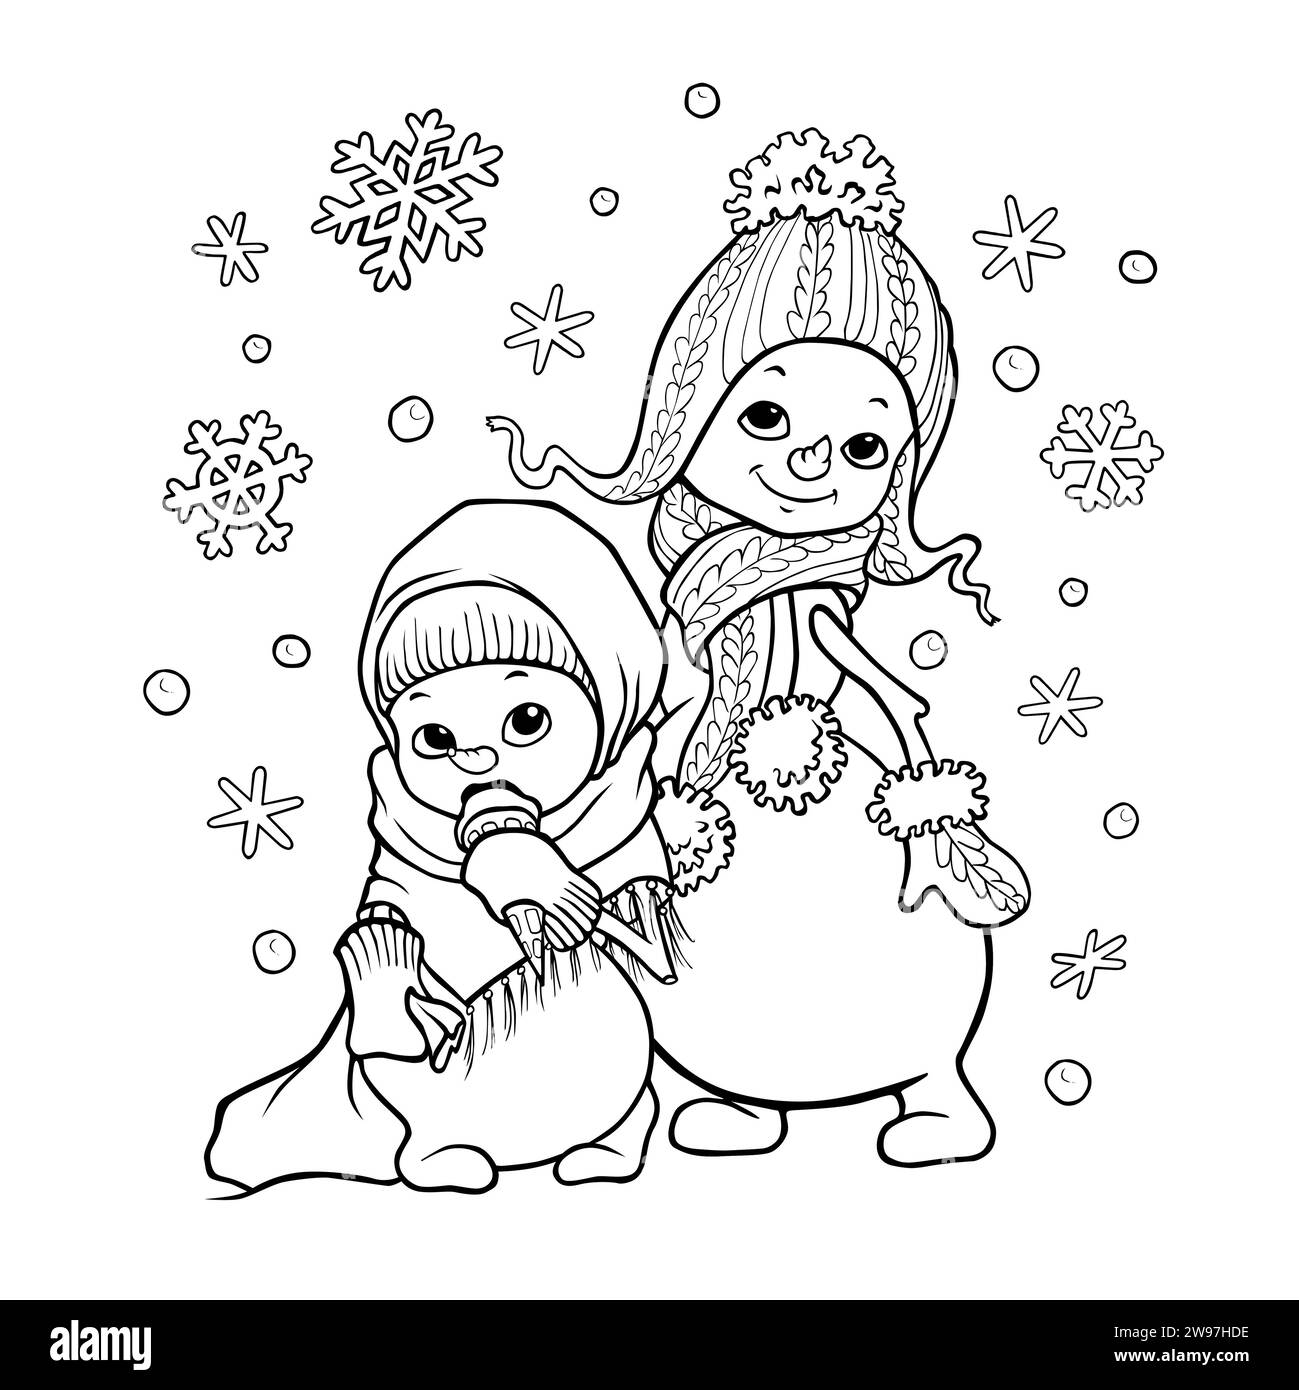 Hand drawn coloring page with two cute cartoon snowmen girls in knitted hats and mittens surrounded by snowflakes. Stock Photo